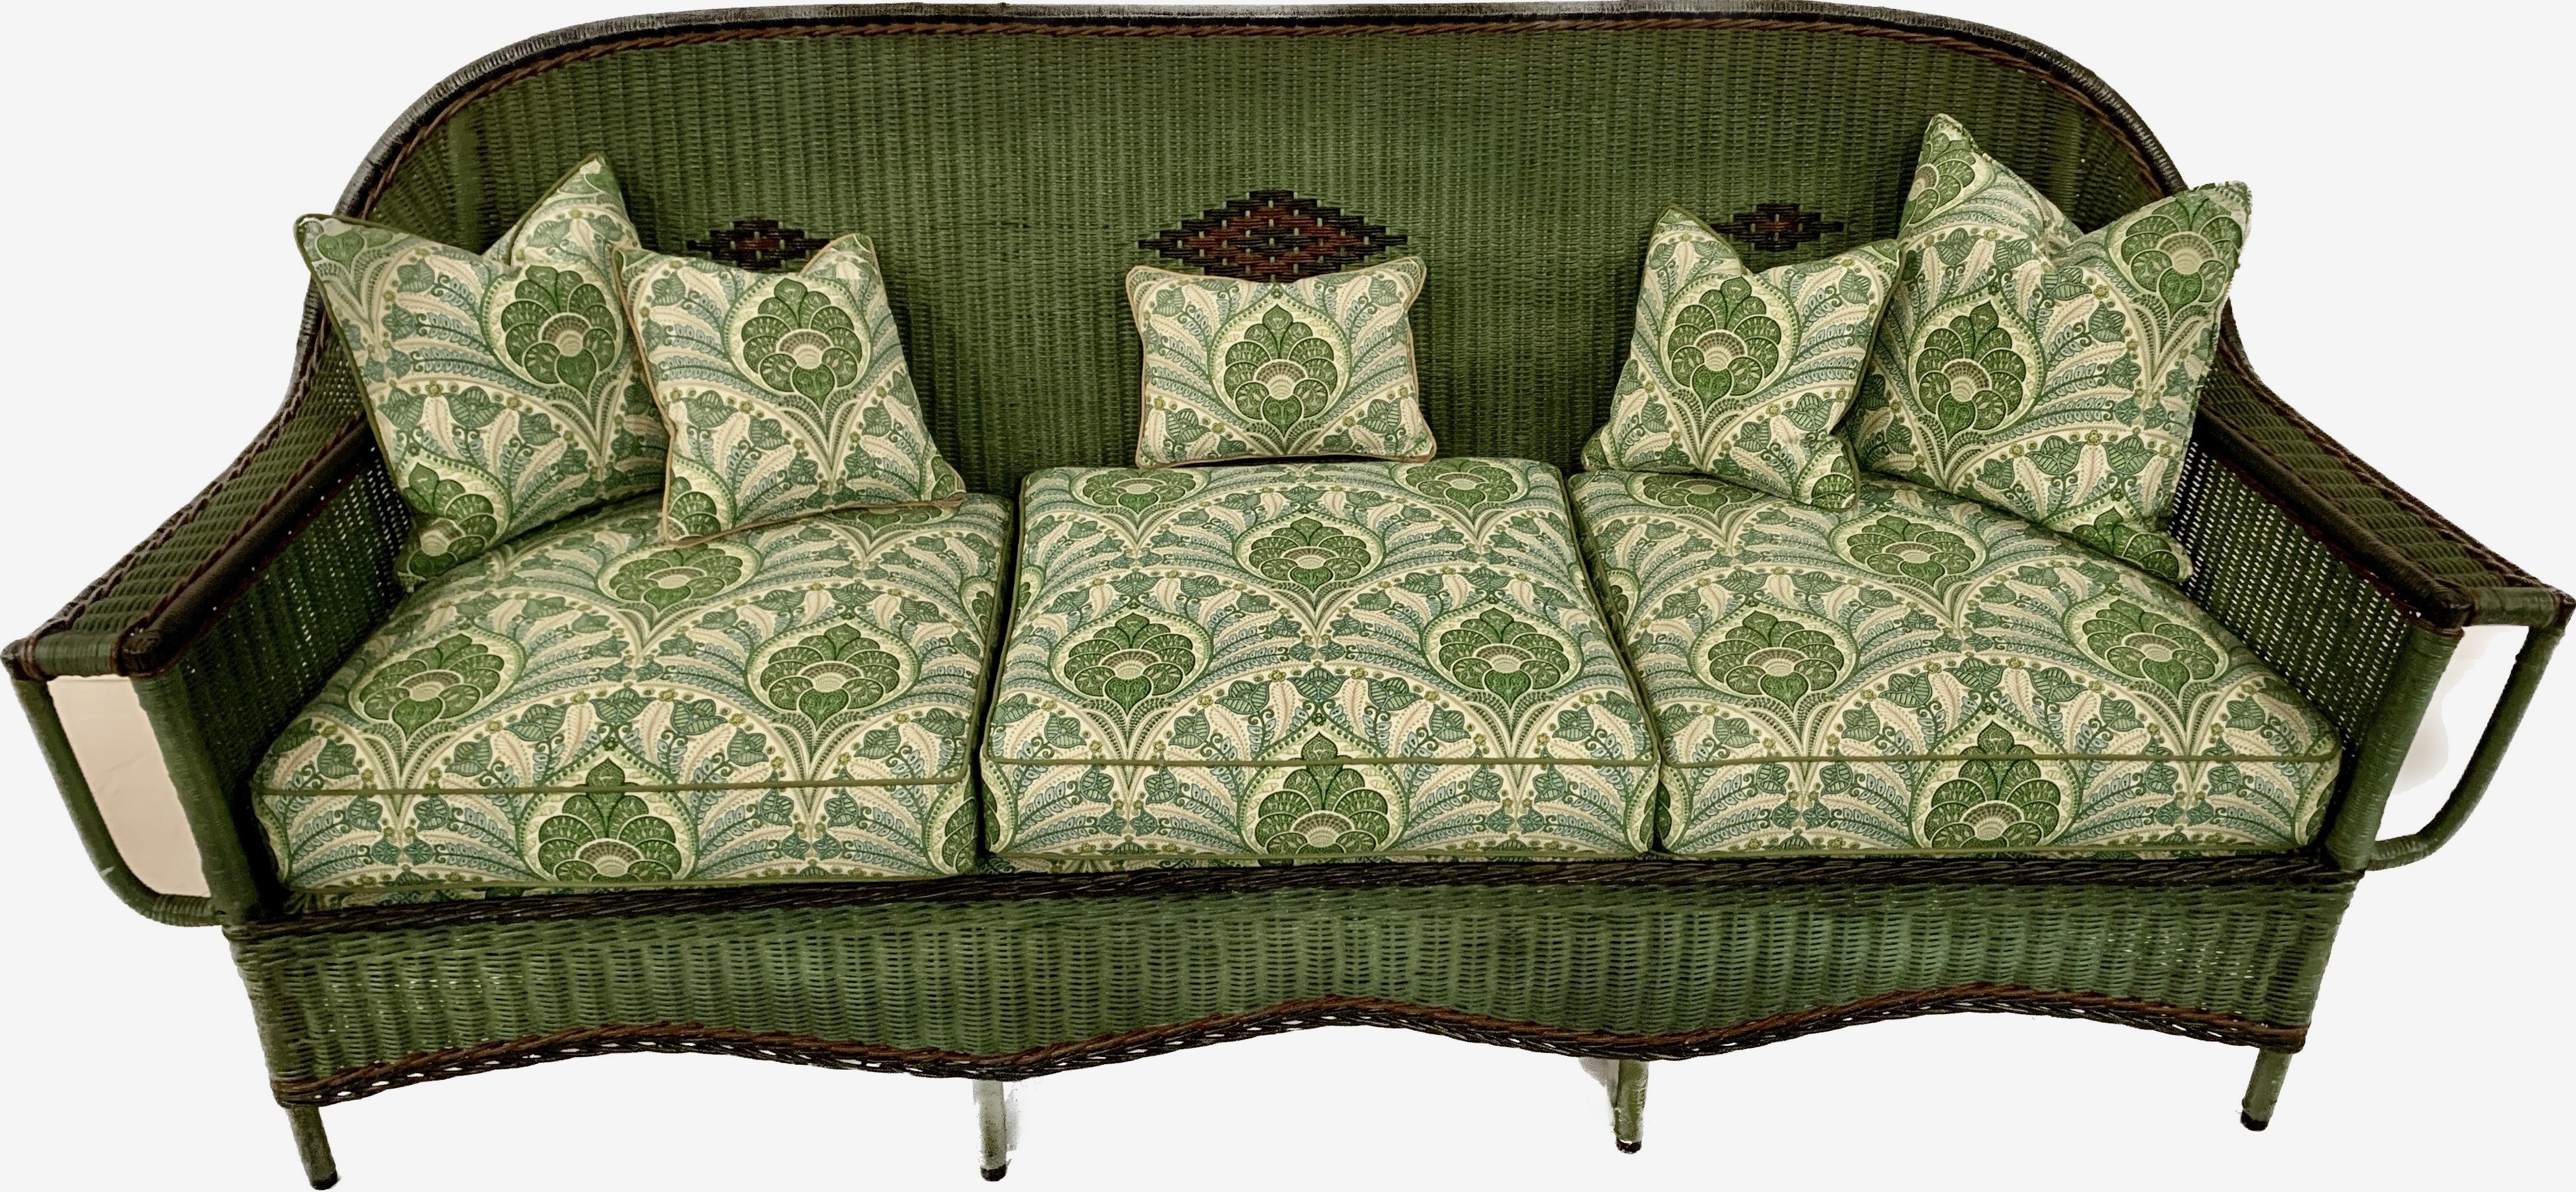 Painted Three Piece Matching Suite of Antique American Close Woven Wicker Furniture